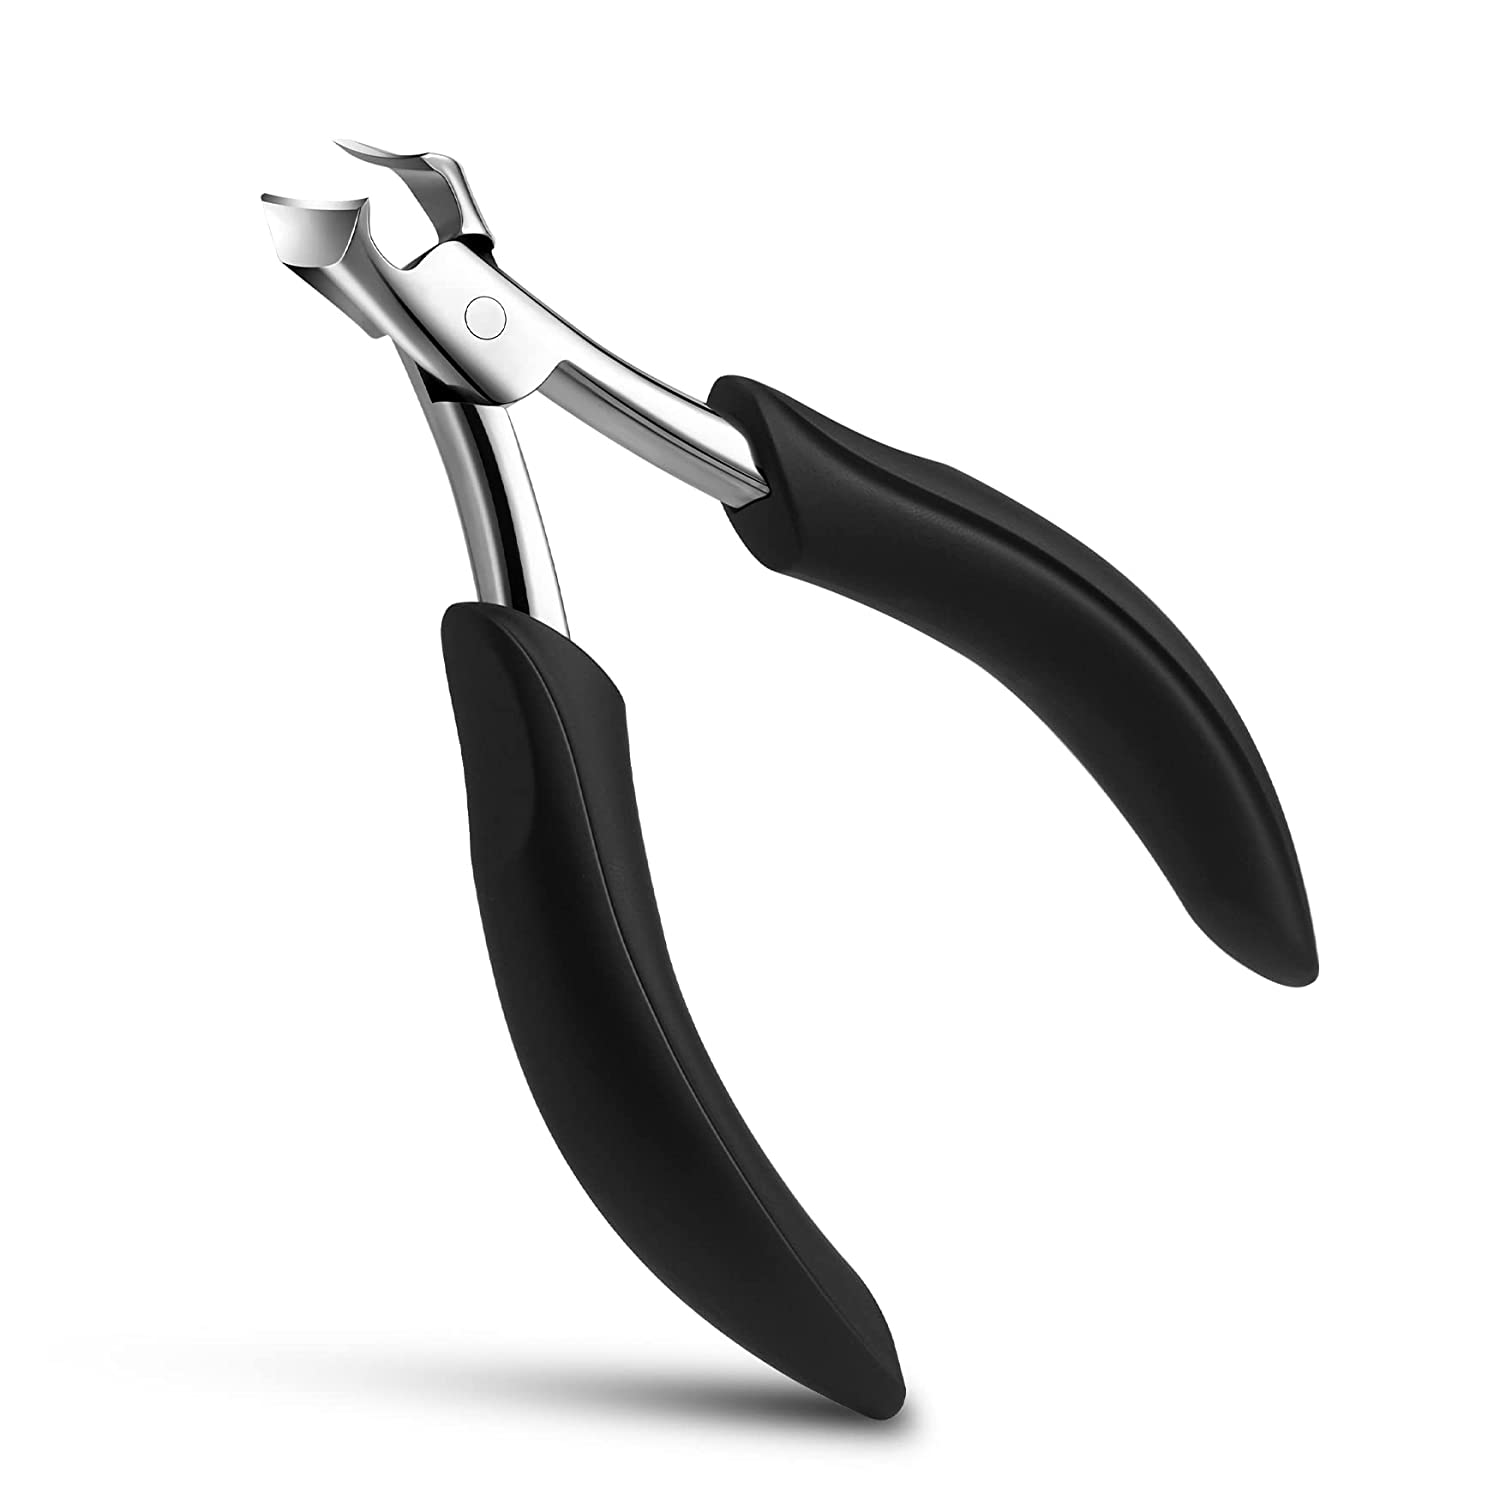 FVION Nail Scissors, Professional Nail Clippers for Deep Ingrown Toenails, Precision Head Cutter for Strong Toenails and Fingernails for Thickness Made of Stainless Steel, ‎black